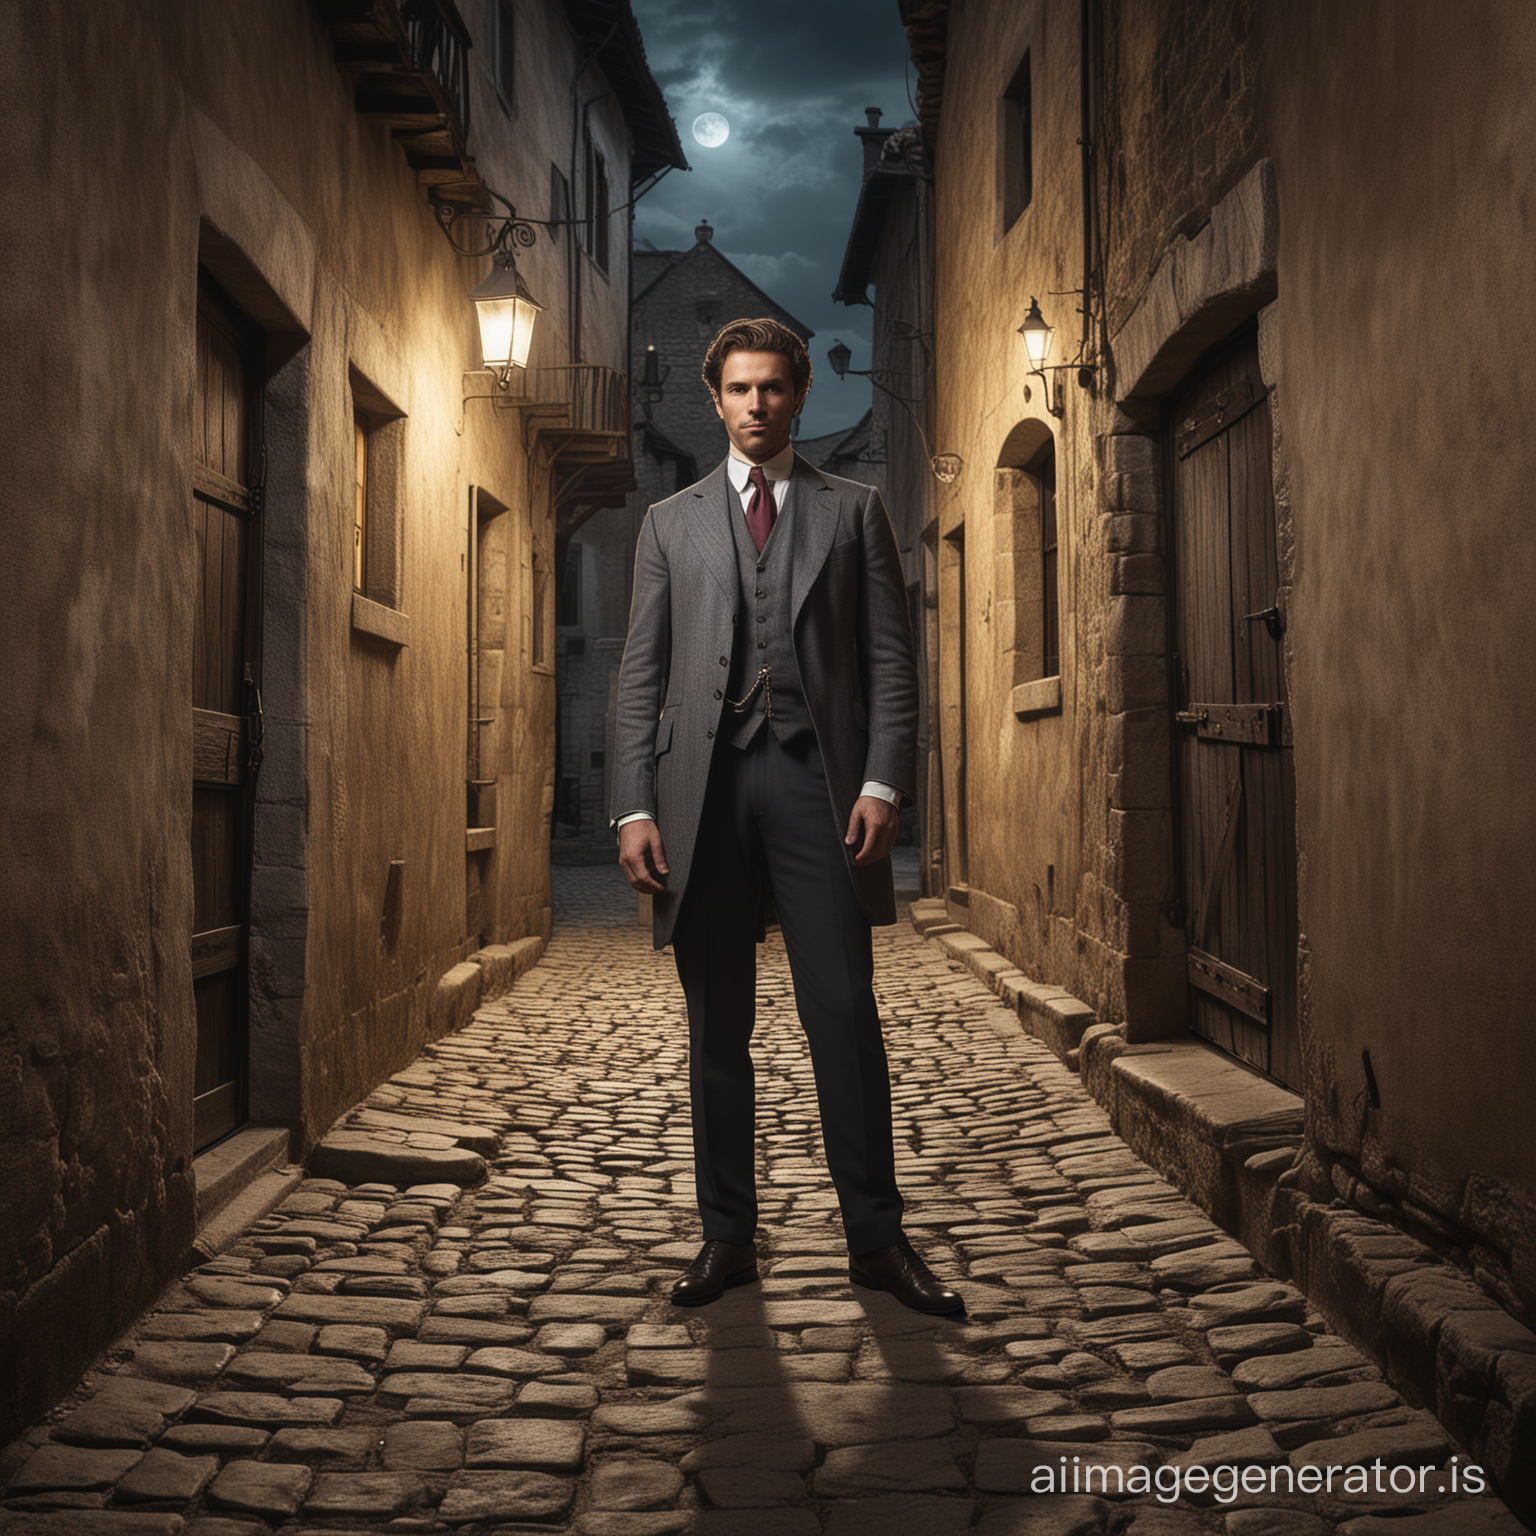 Businessman, 1850, standing in a dark alley in a medieval village, photo in color